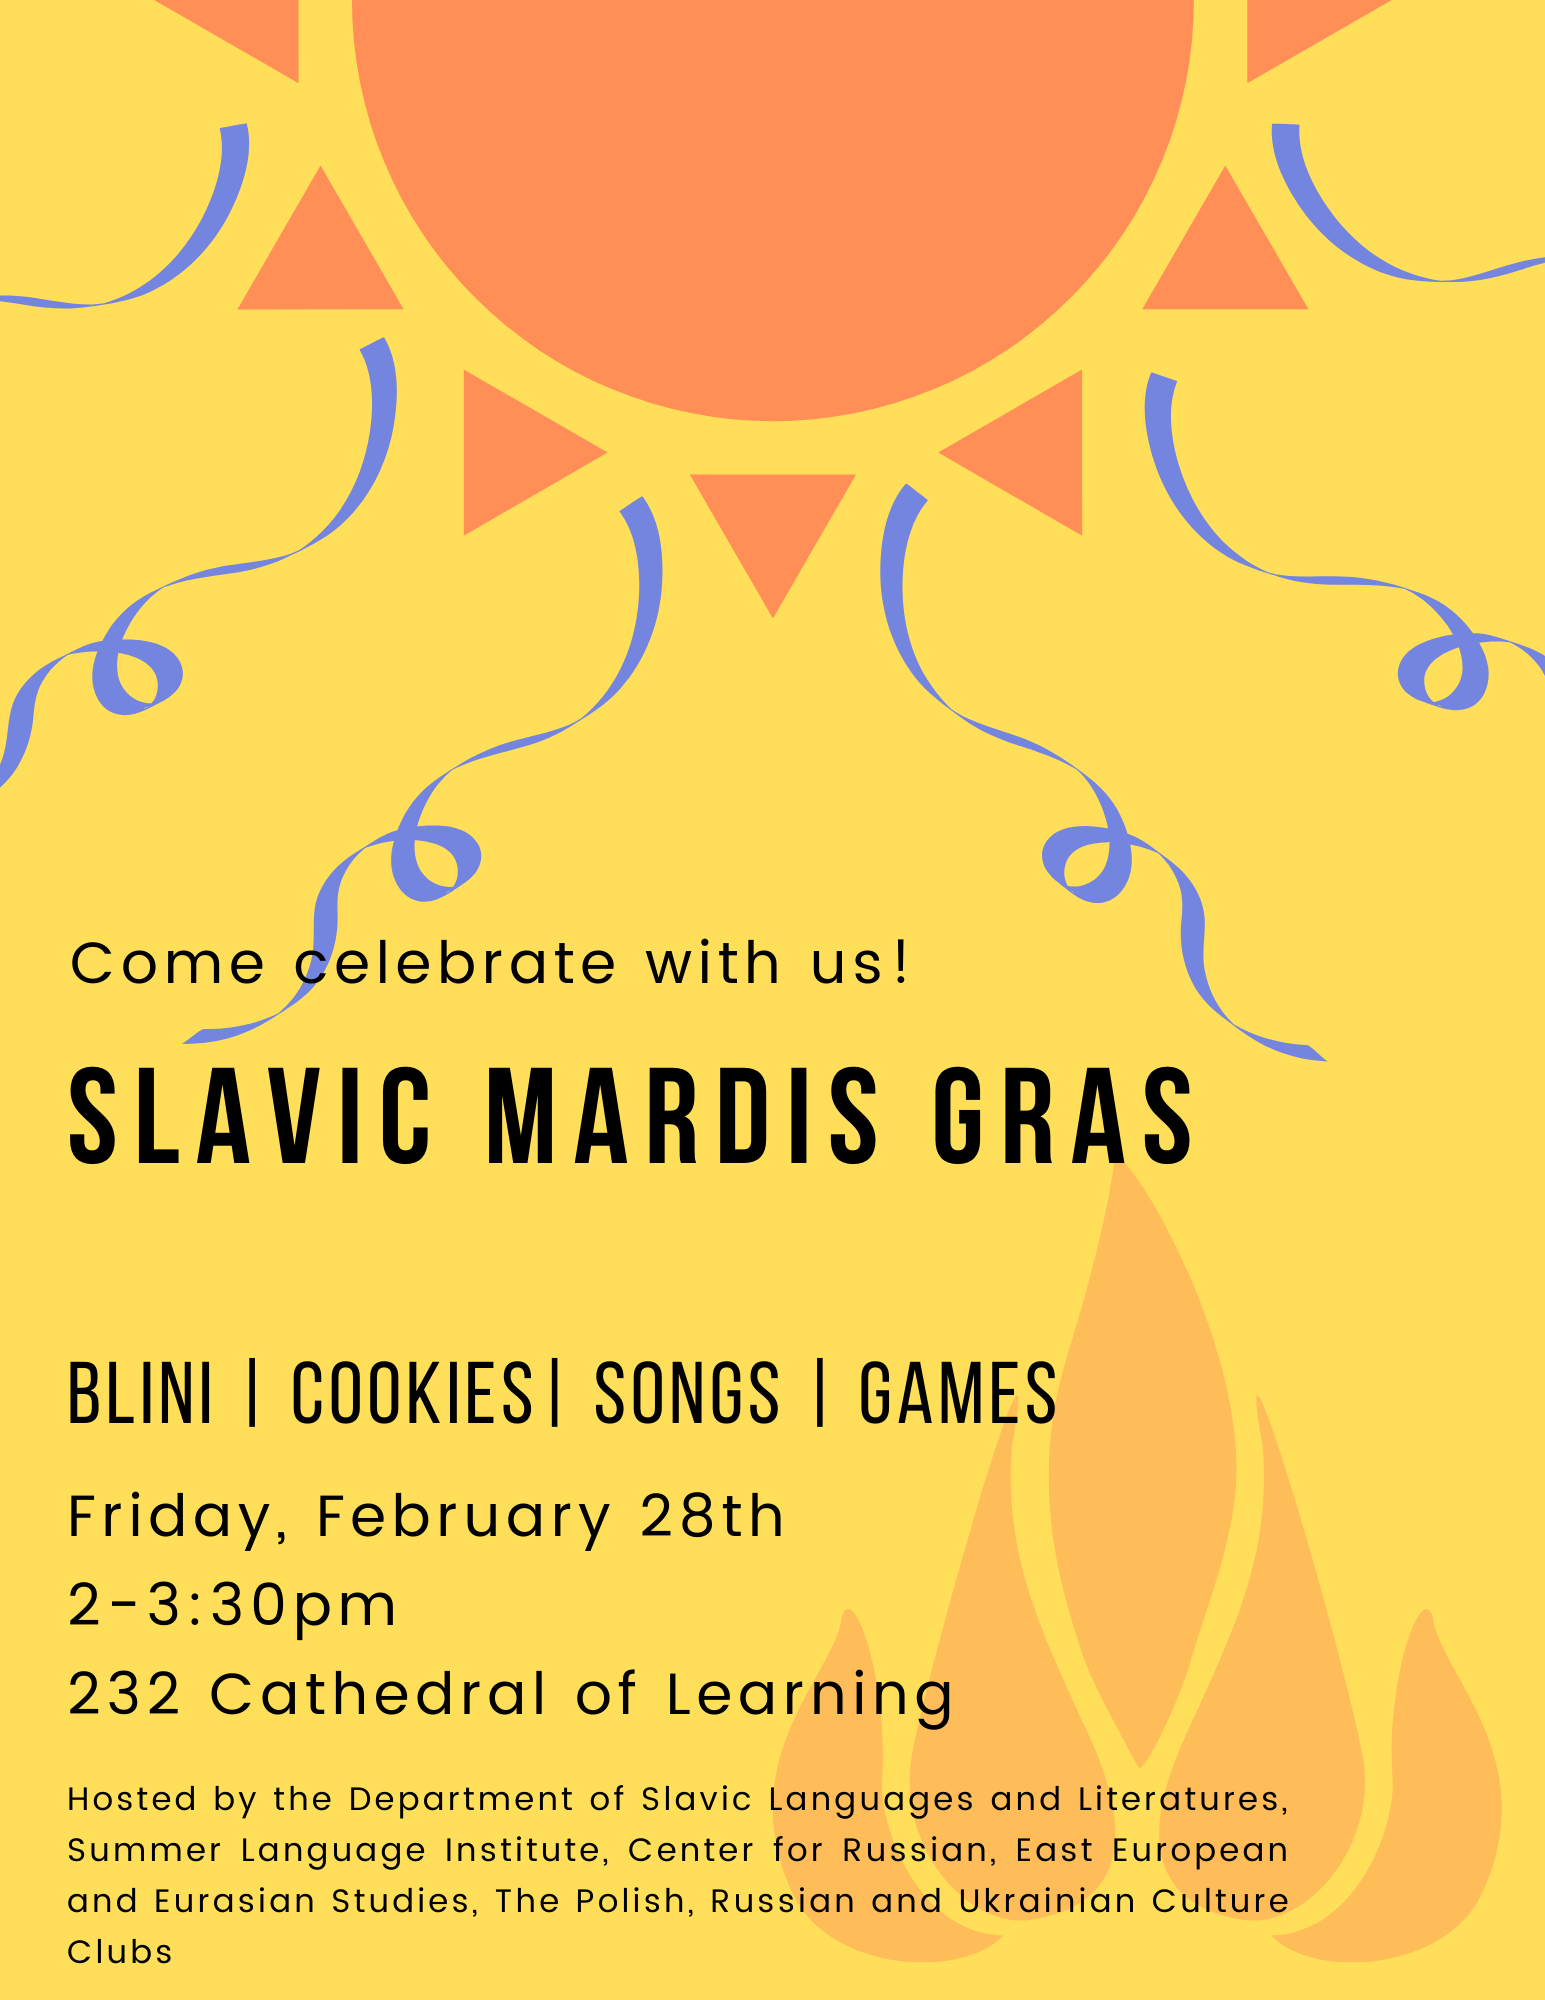 Come Celebrate with Us at the Slavic Mardi Gras, taking place on 2/28 from 2-3:30pm in room 232 of the Cathedral of Learning,. This poster contains a picture of a sun with streamers and a campfire.